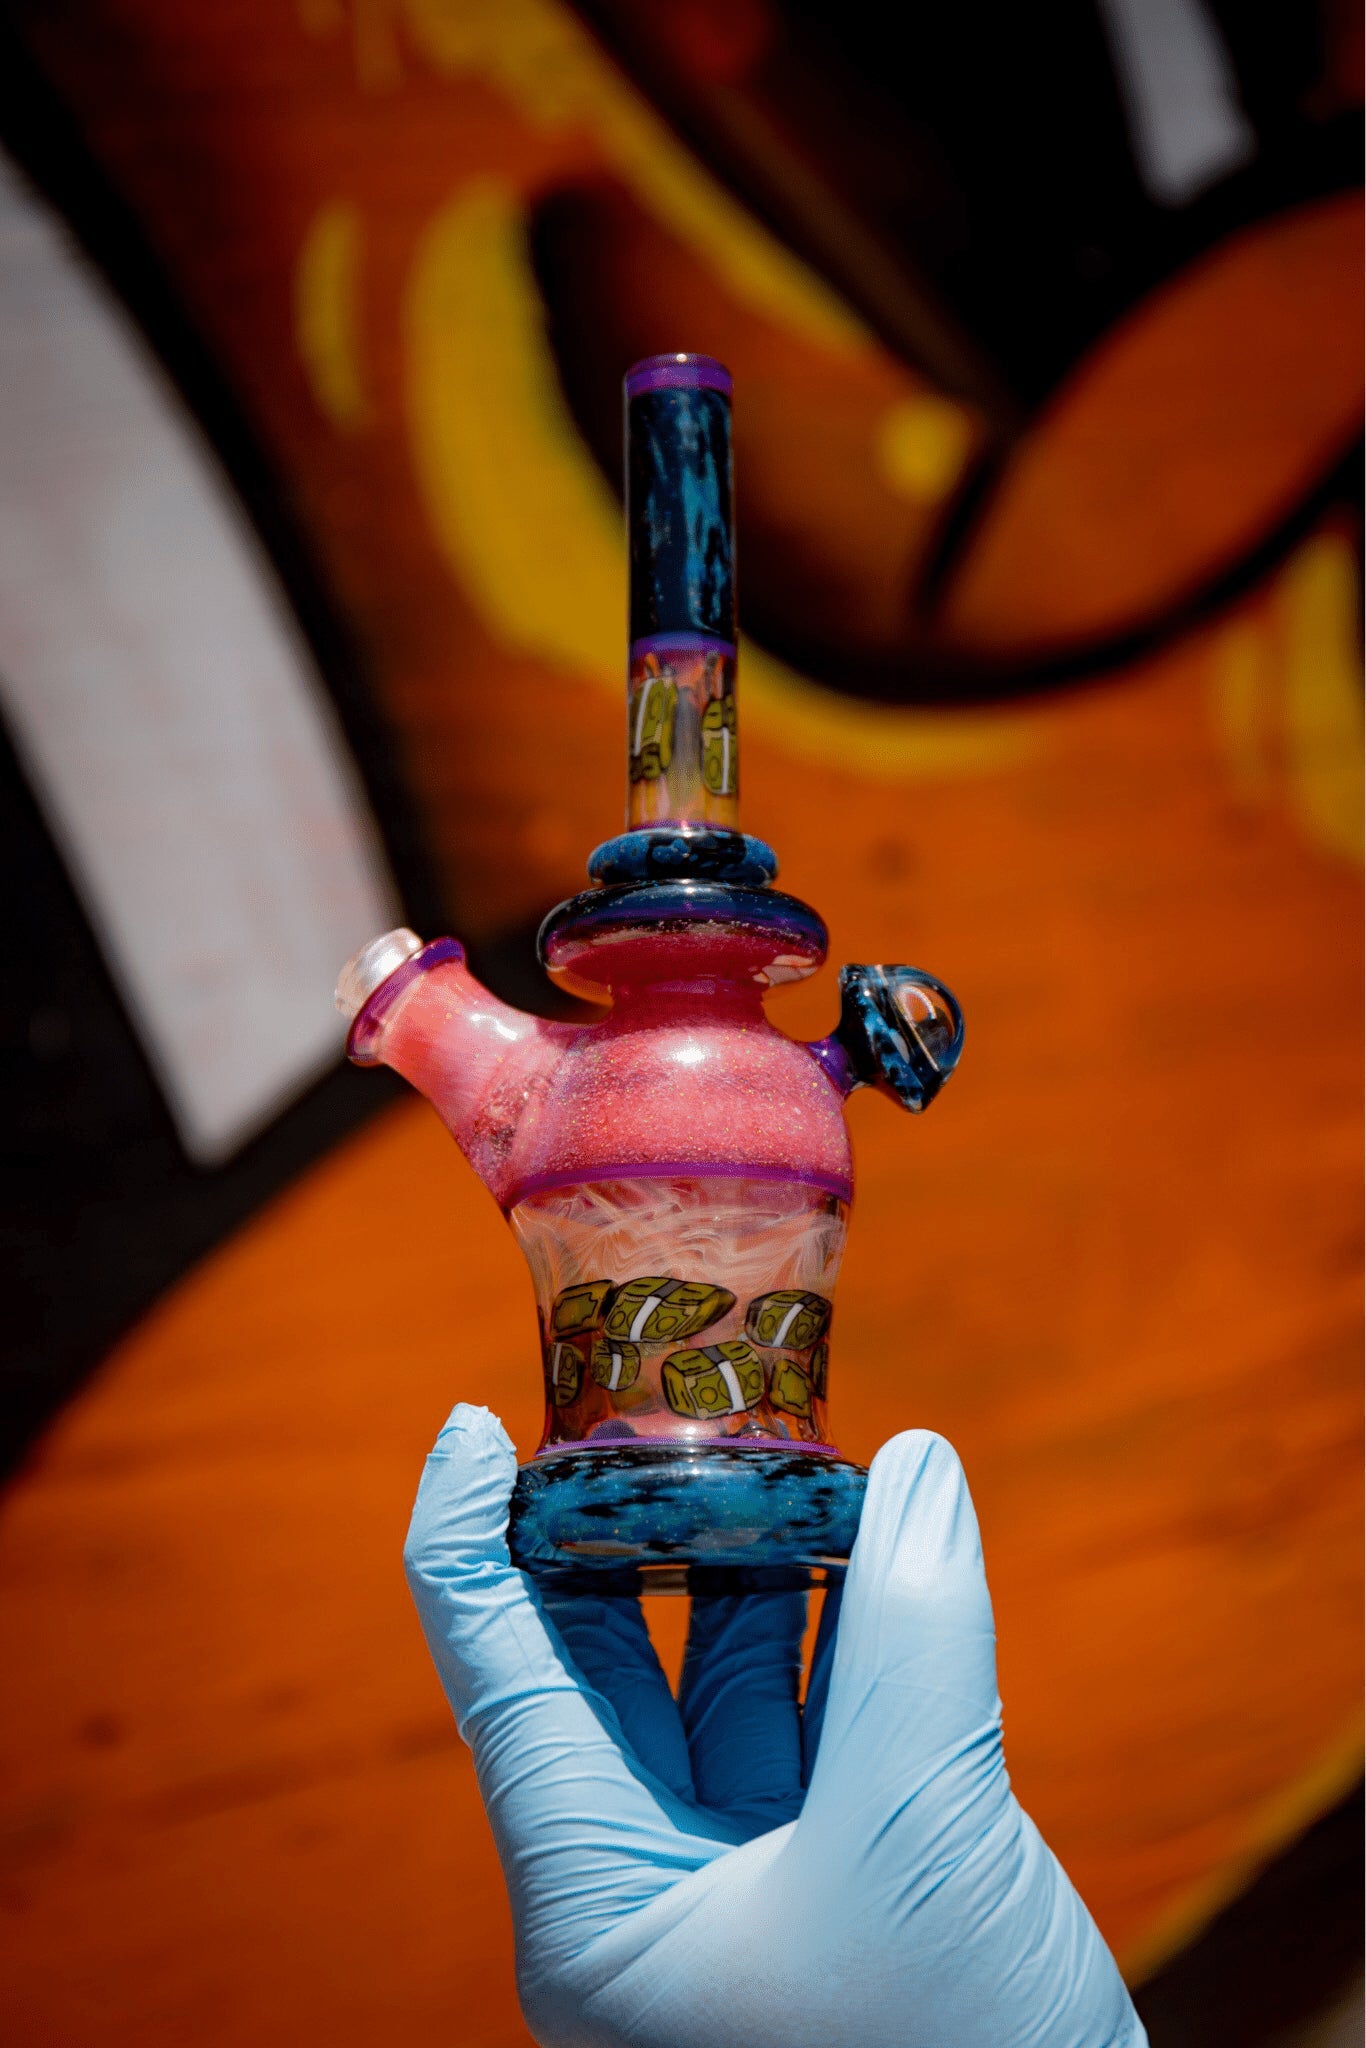 exquisite design of the Space Tech Collab Rig  by GROE x Big Z(Got The Juice 2022)